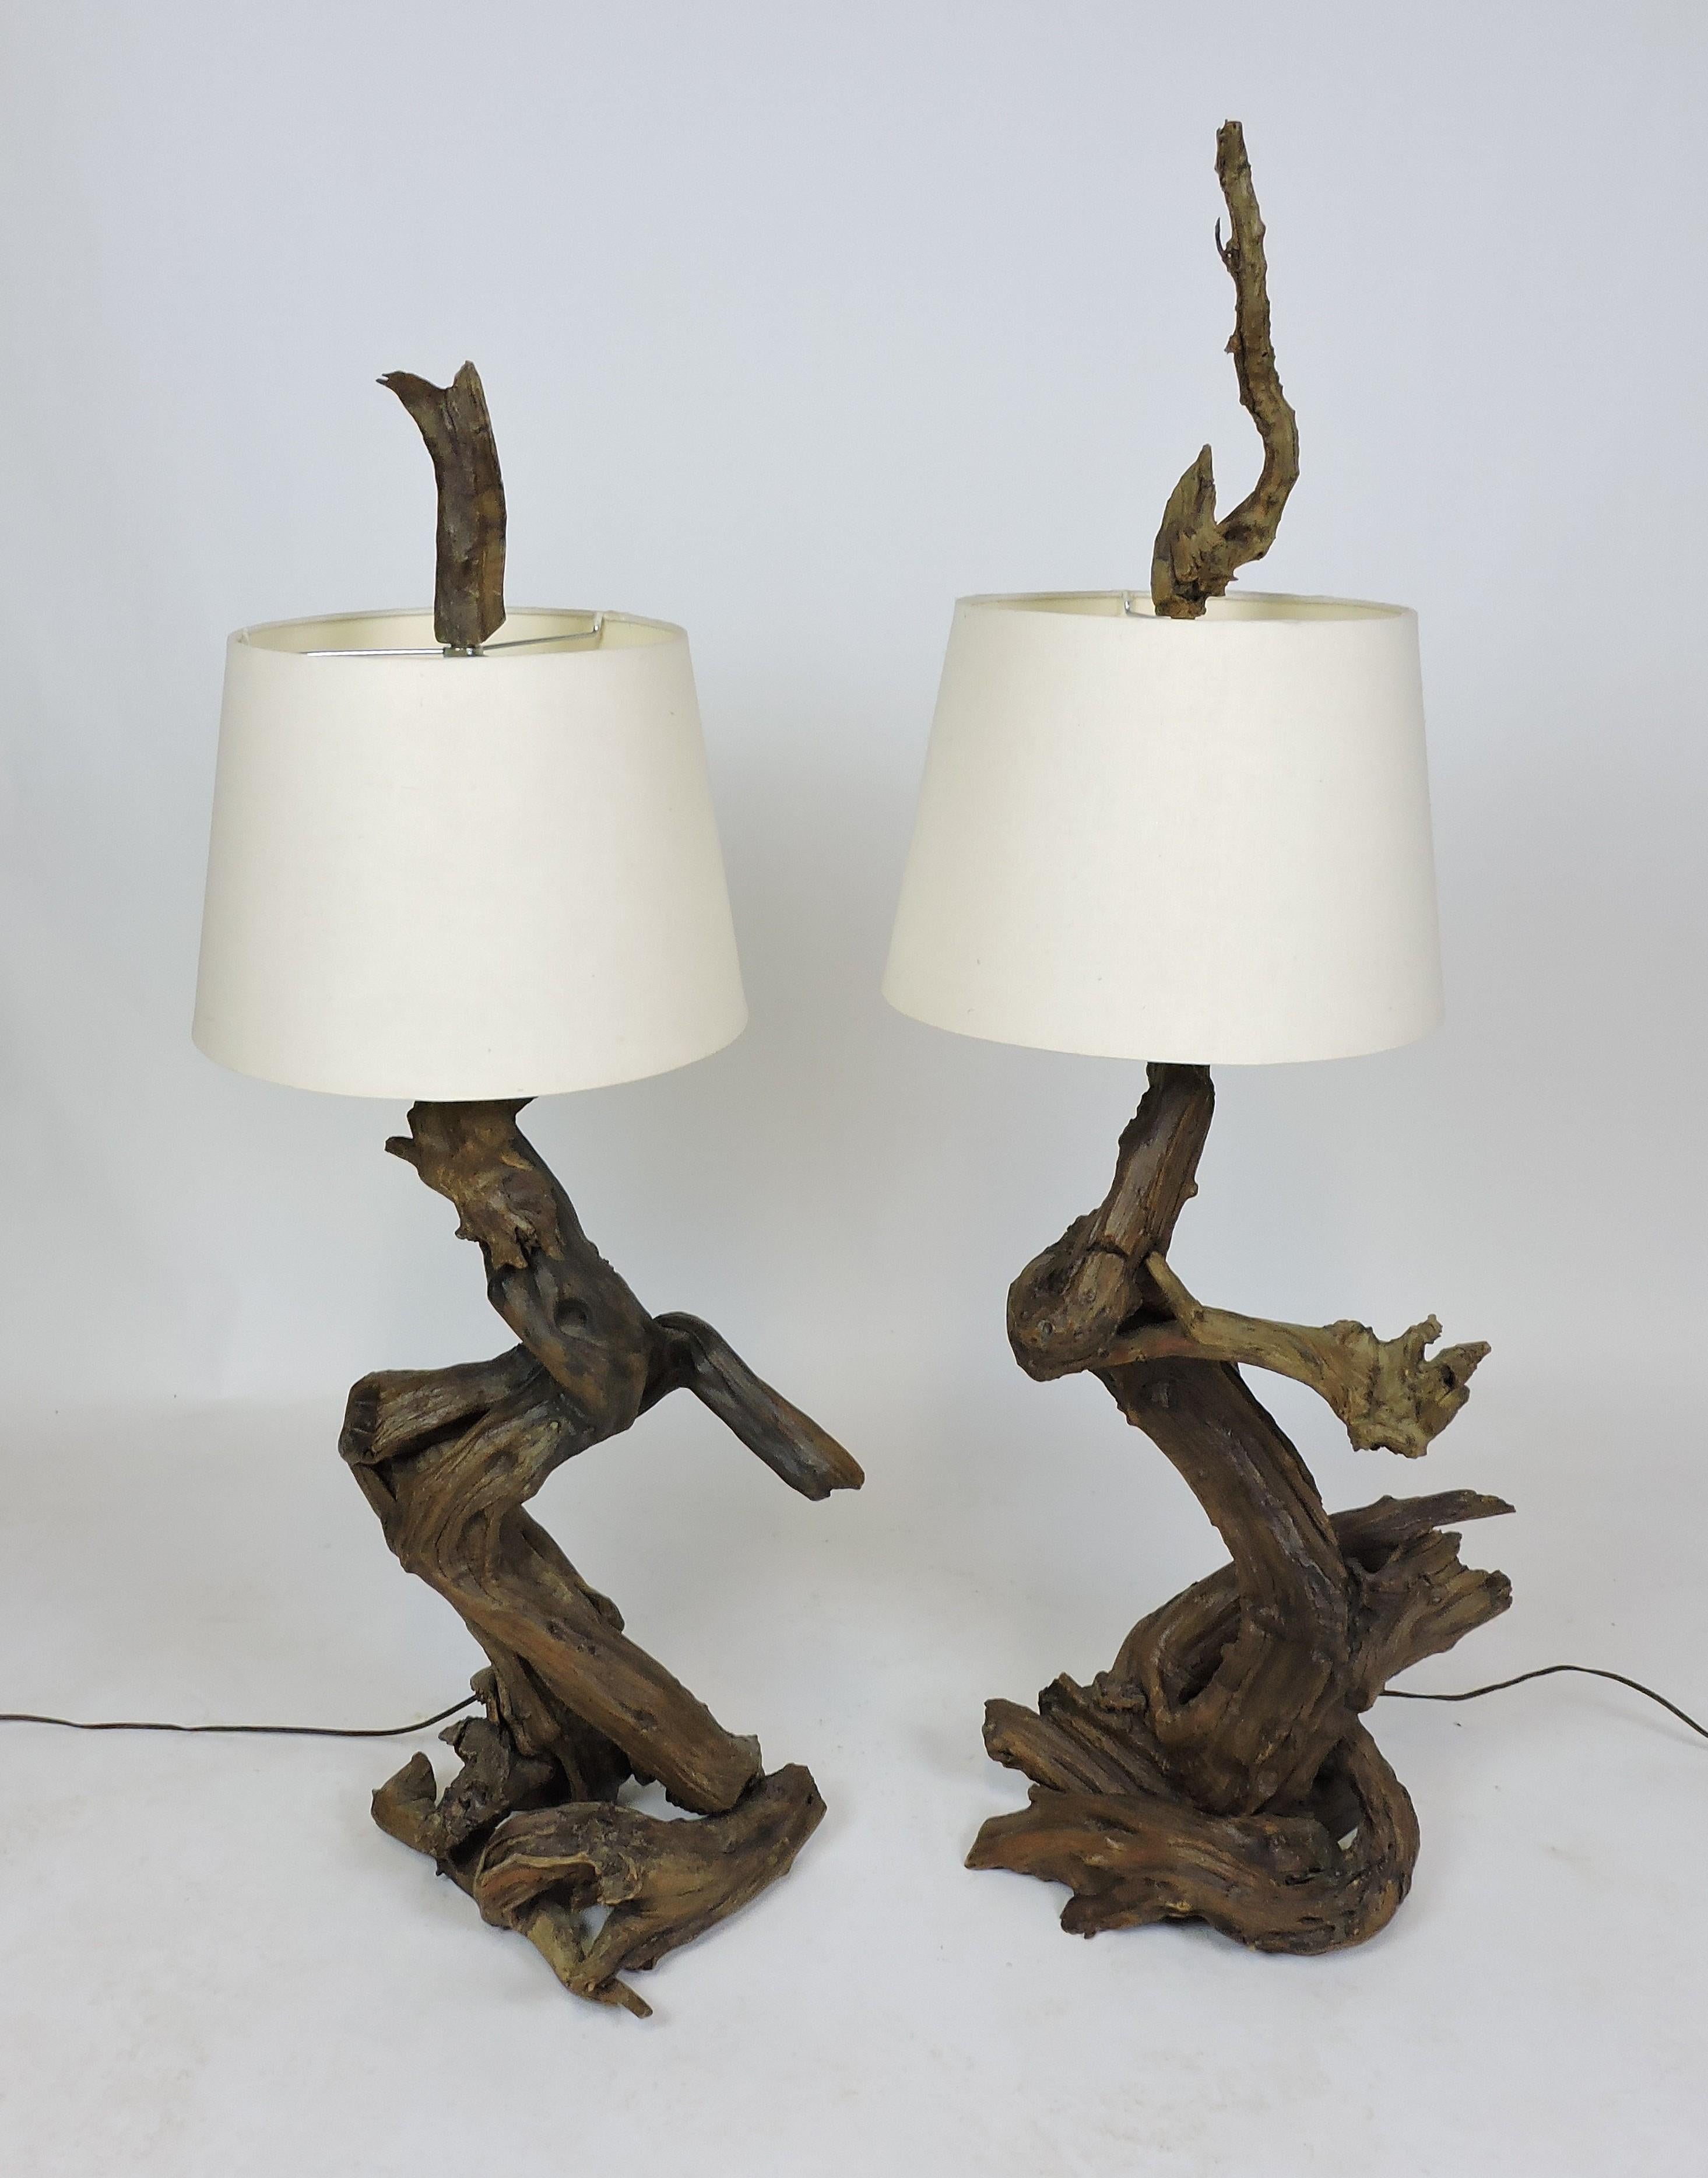 Pair of Monumental Size Mid-Century Modern Sculptural Driftwood Lamps 1